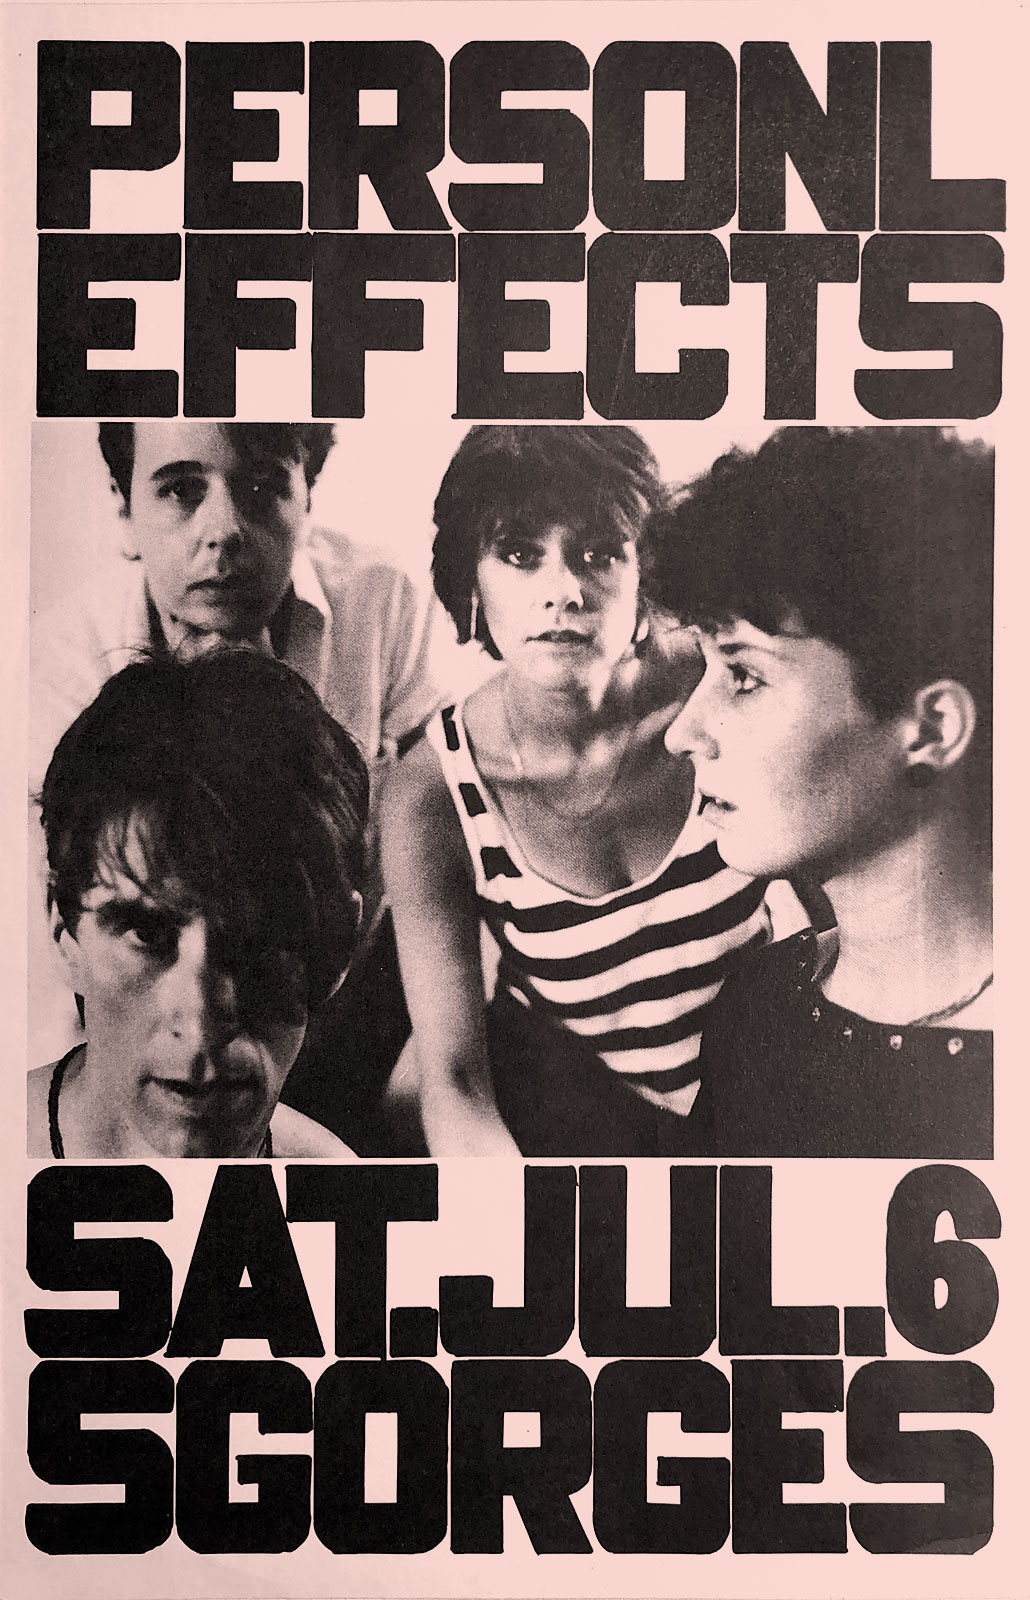 Poster for Personal Effects at Scorgies in Rochester, New York on 07.06.1985